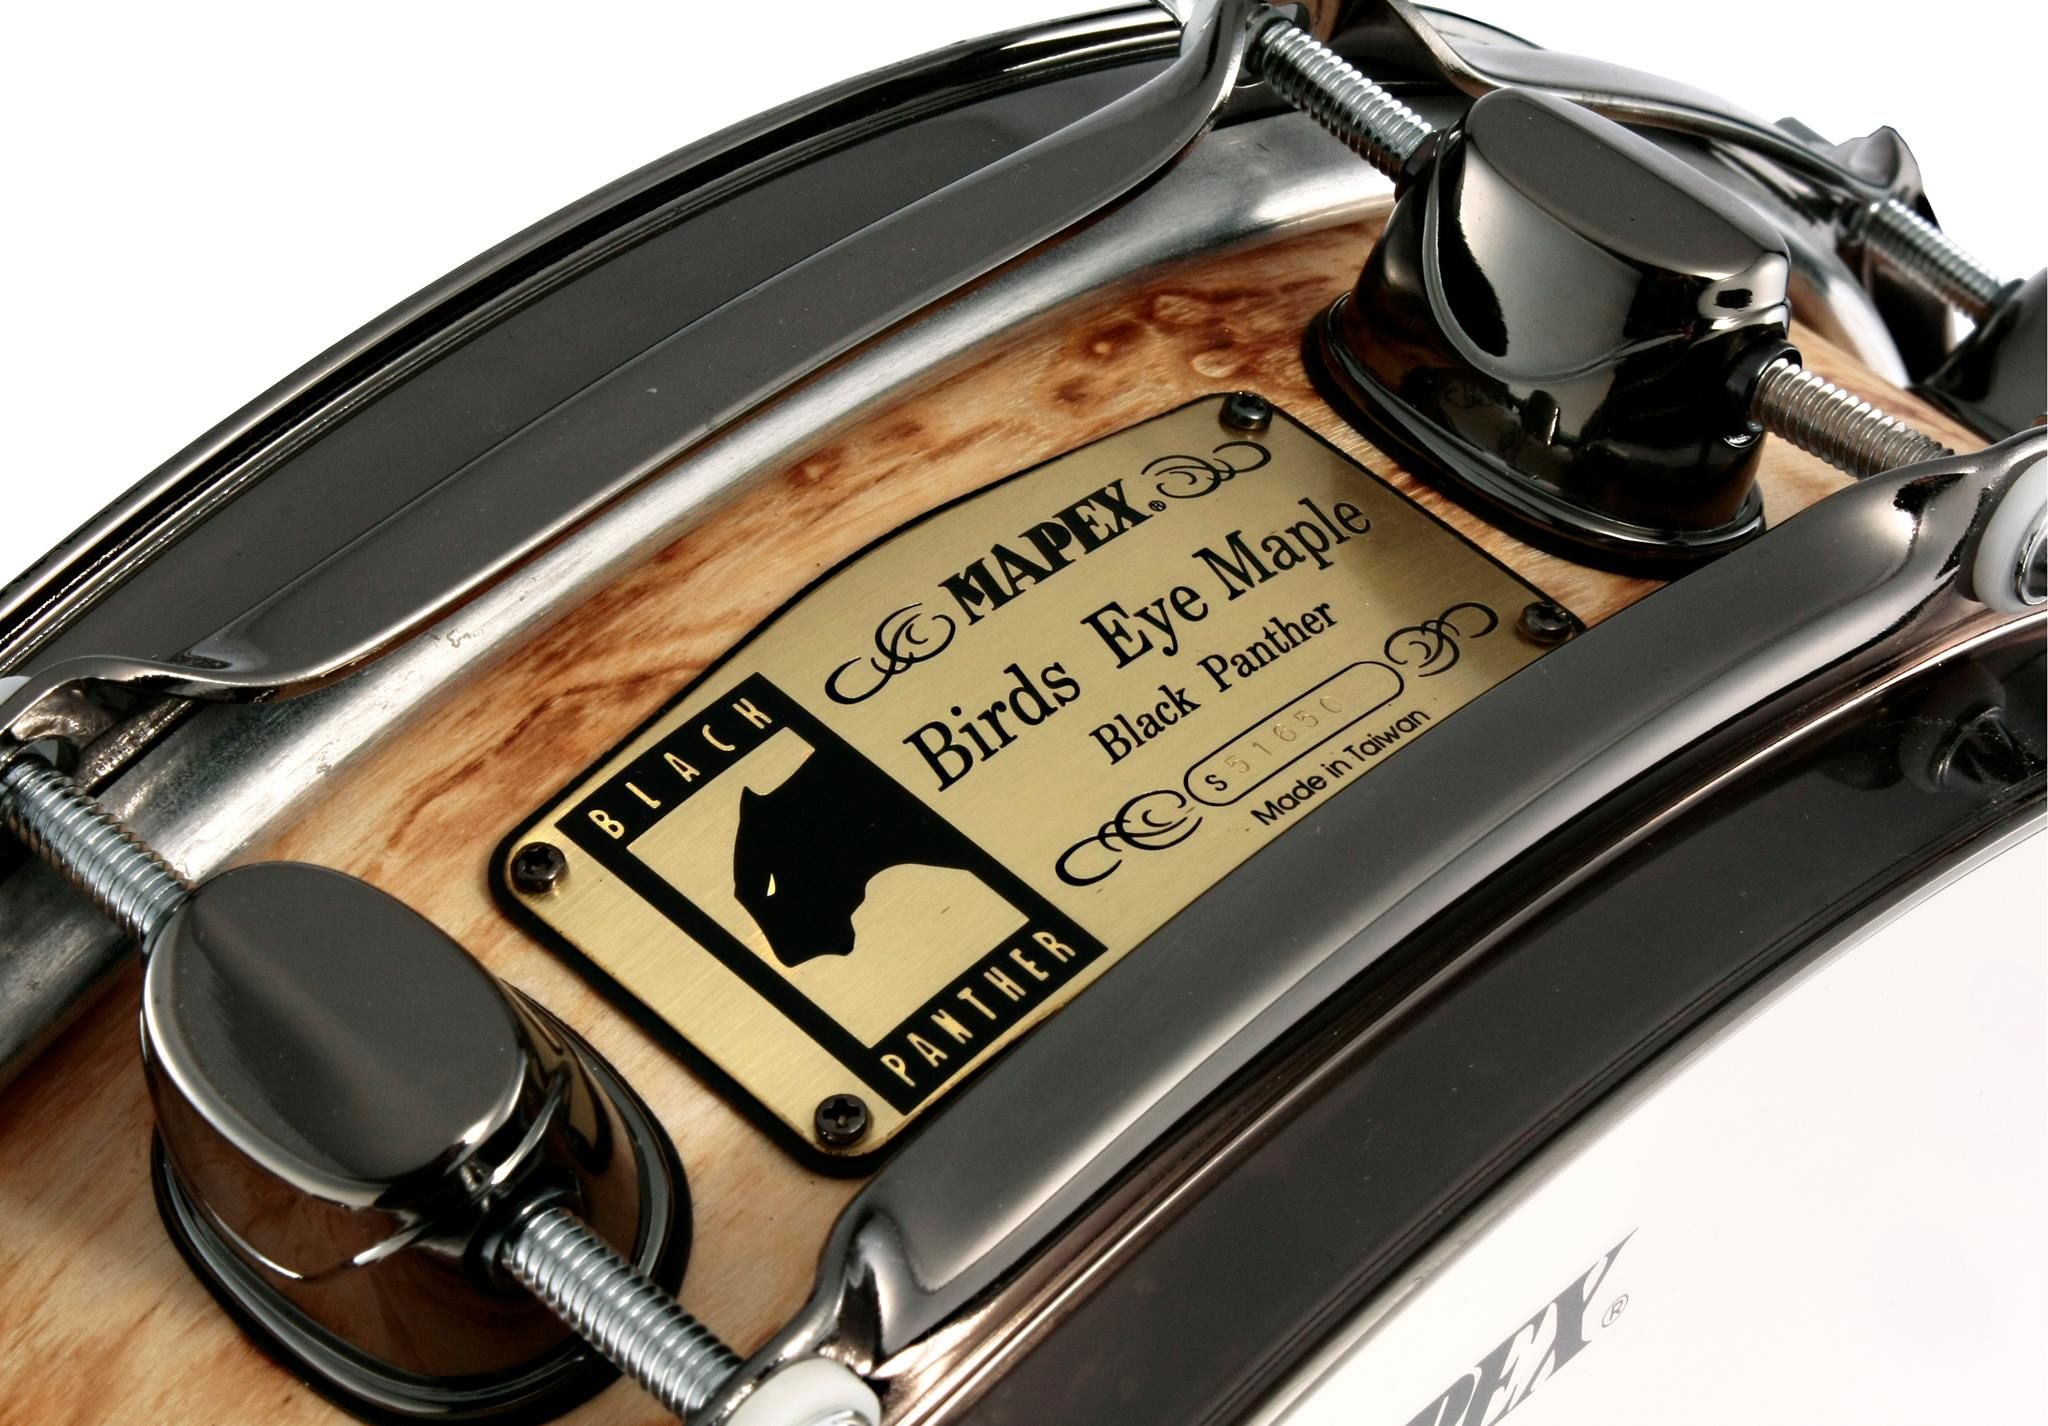 14 x 3.5 Bird's Eye Piccolo Snare Burned Charcoal Burst Japan Only